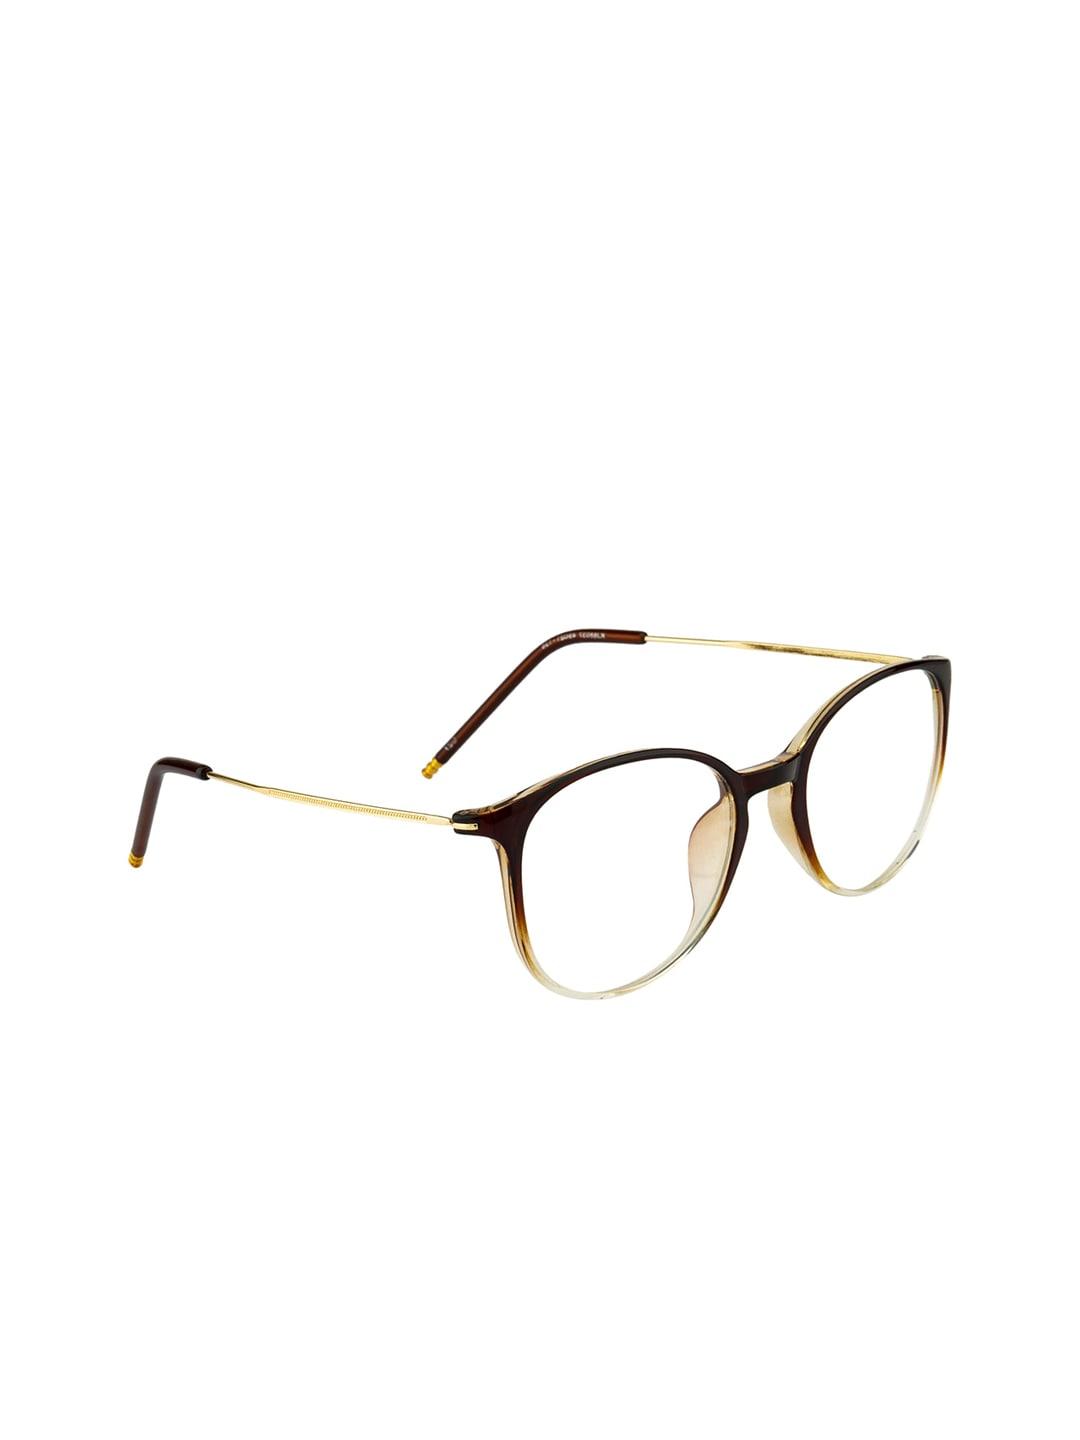 ted smith unisex gold-toned & brown solid full rim round frames ts-j88037_c27